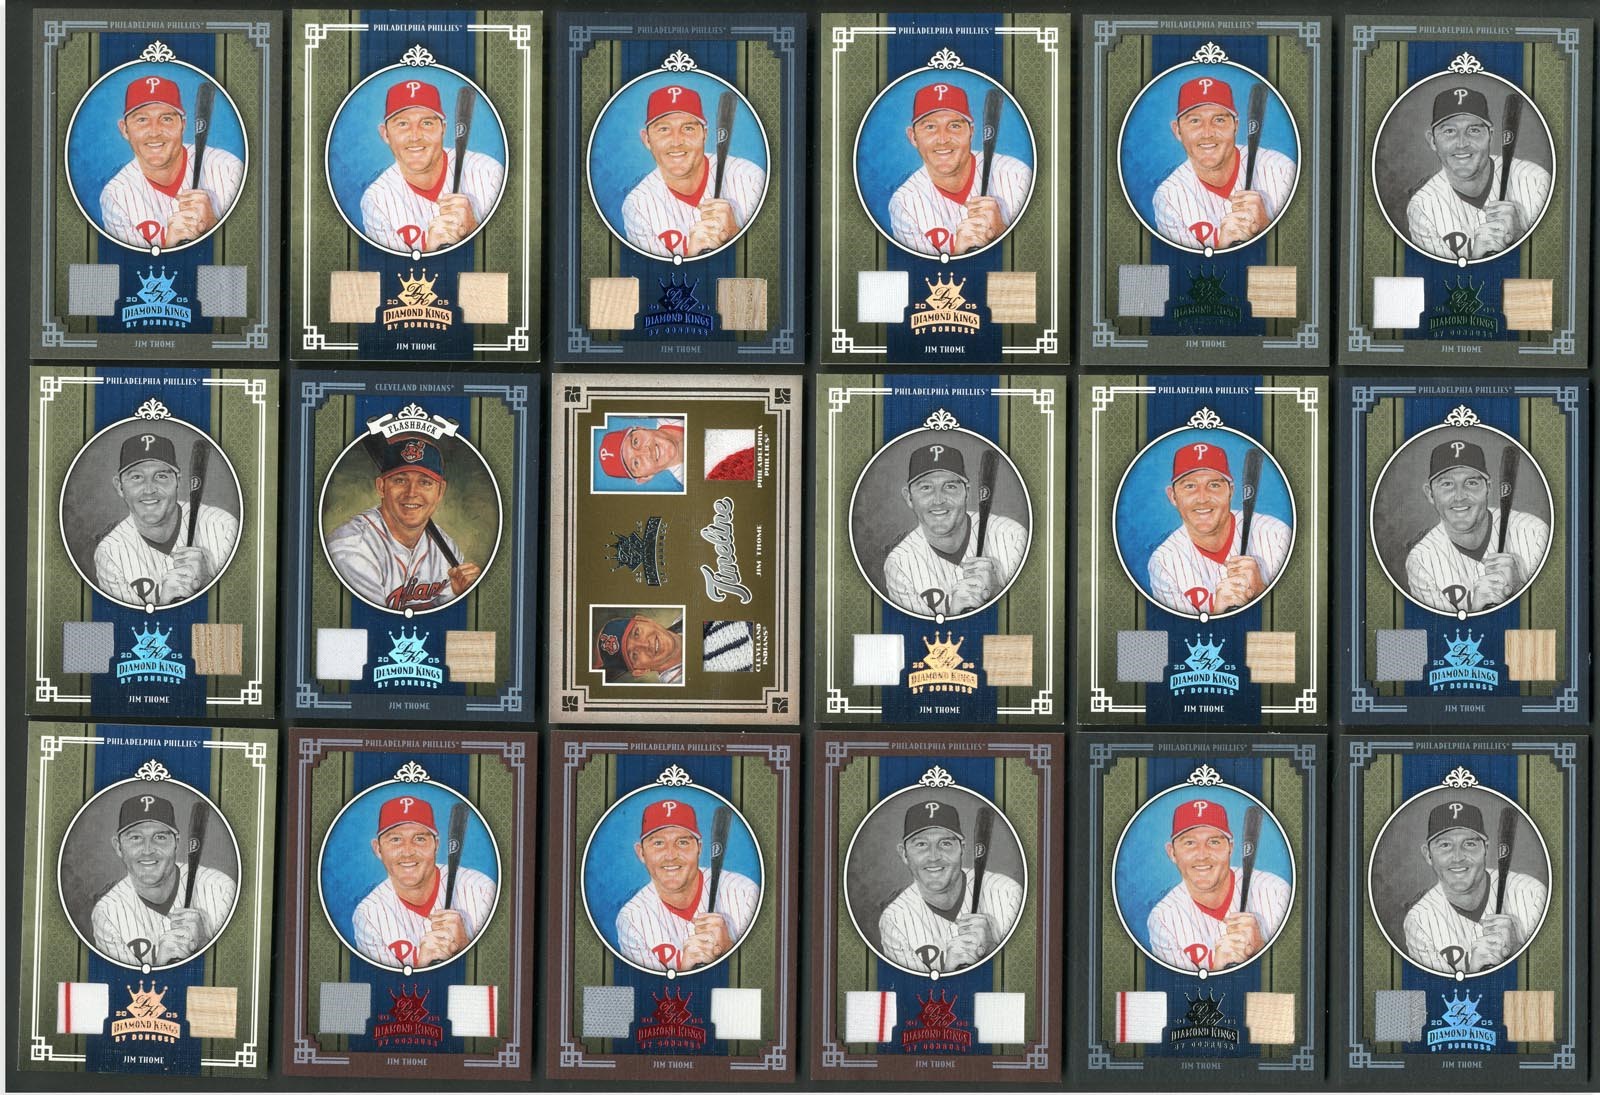 Jim Thome Master Collection - 2005 Diamond Kings Crowning Moment Jim Thome "1 of 1" and Memorabilia Collection (50+)